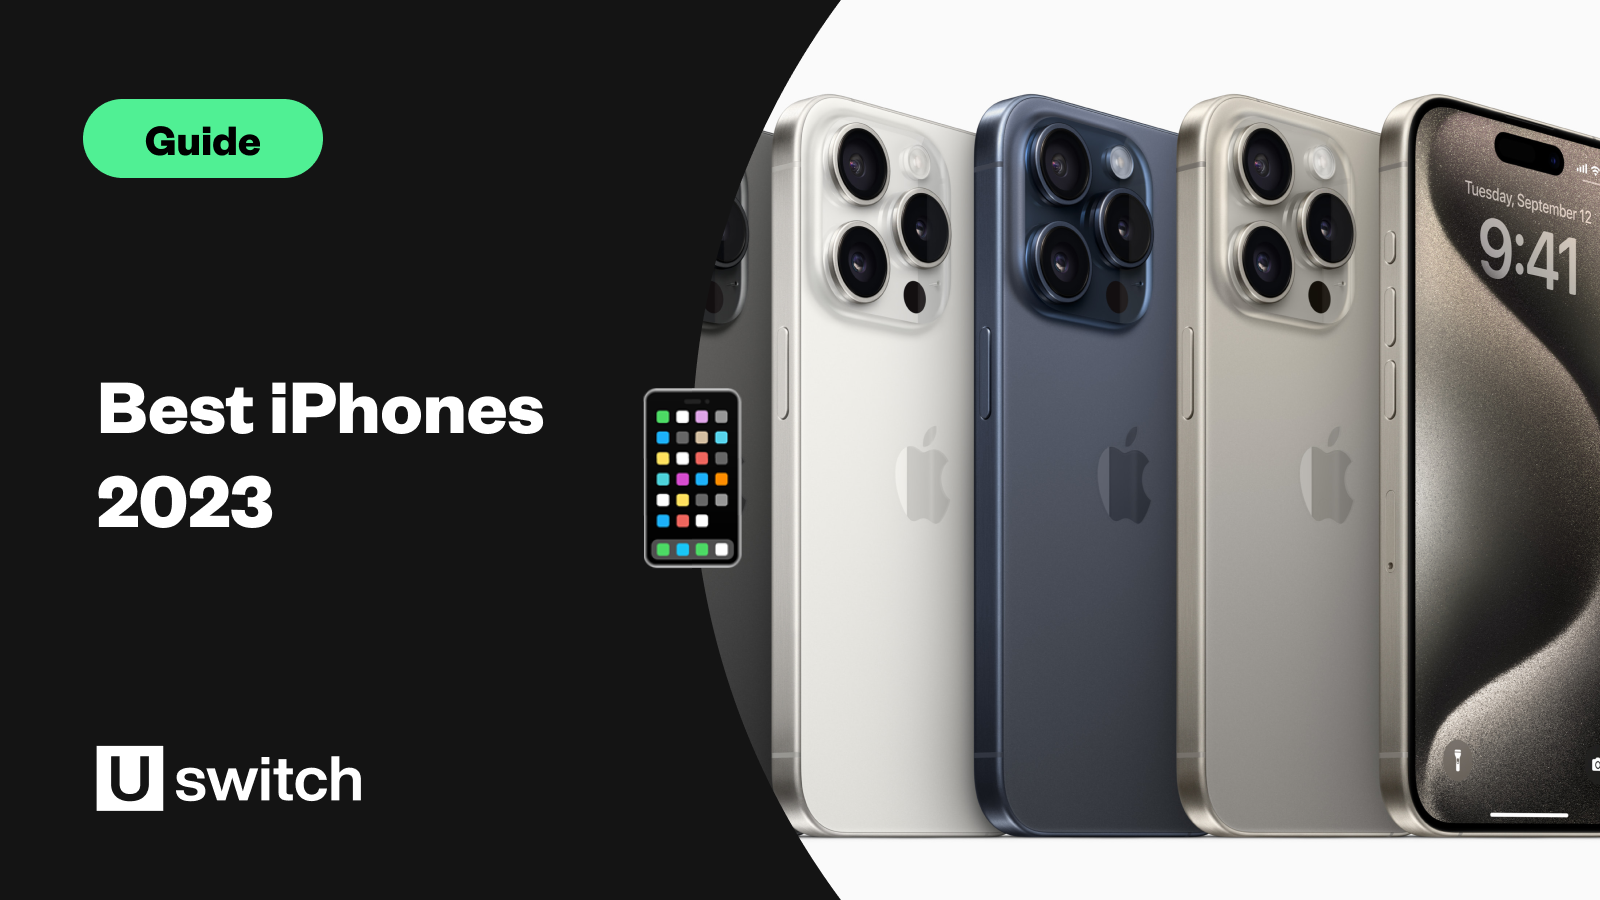 iPhone 11, iPhone 11 Pro, iPhone 11 Pro Max setup guide and tips